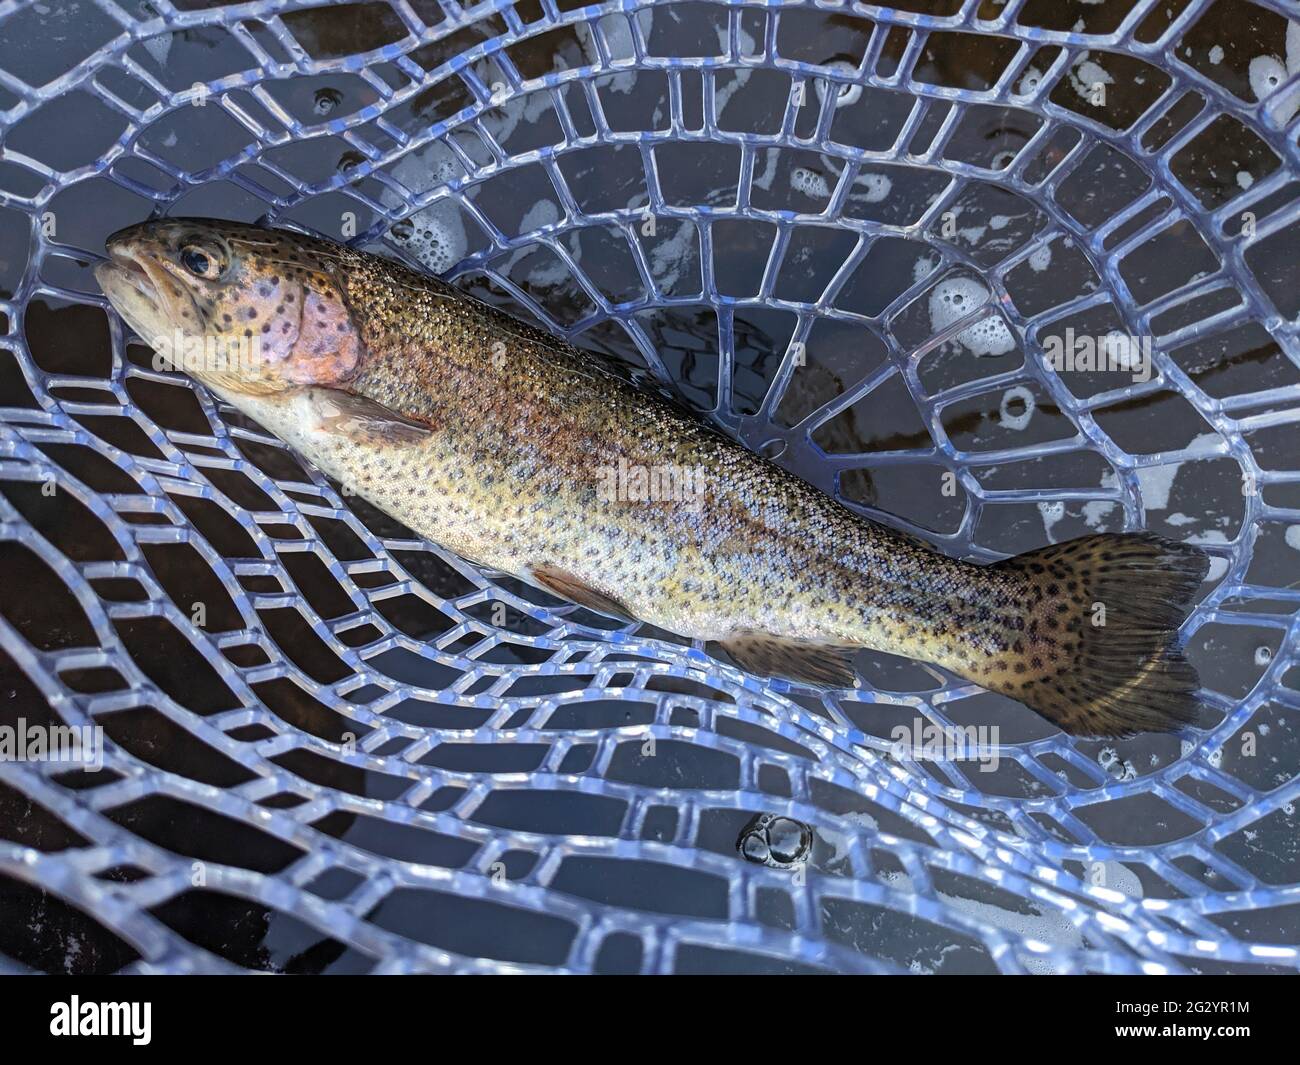 Trout in net while fly fishing in river Stock Photo